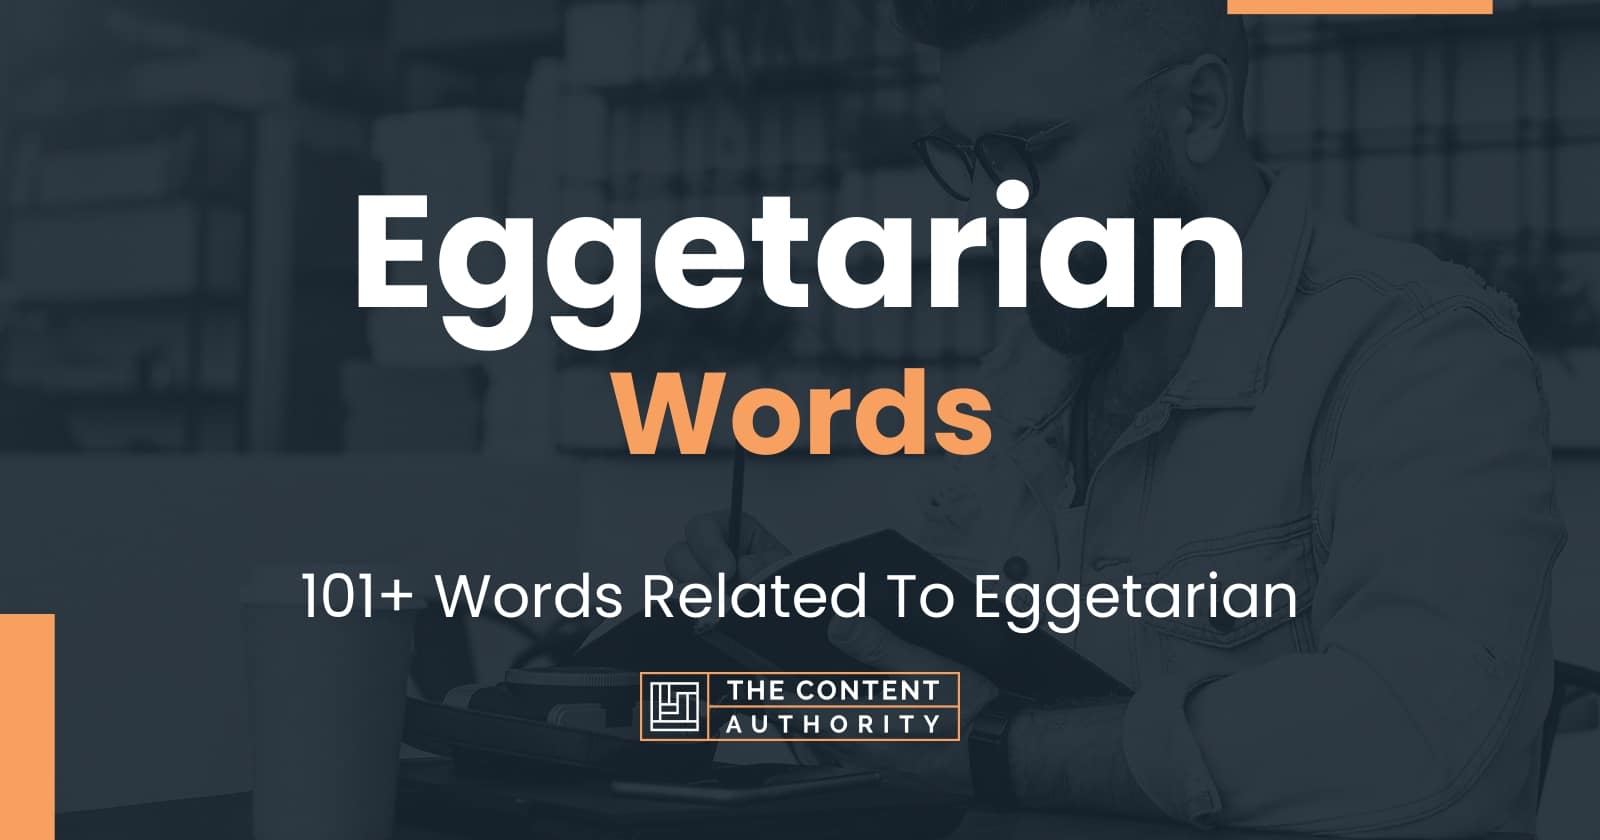 Eggetarian Words - 101+ Words Related To Eggetarian